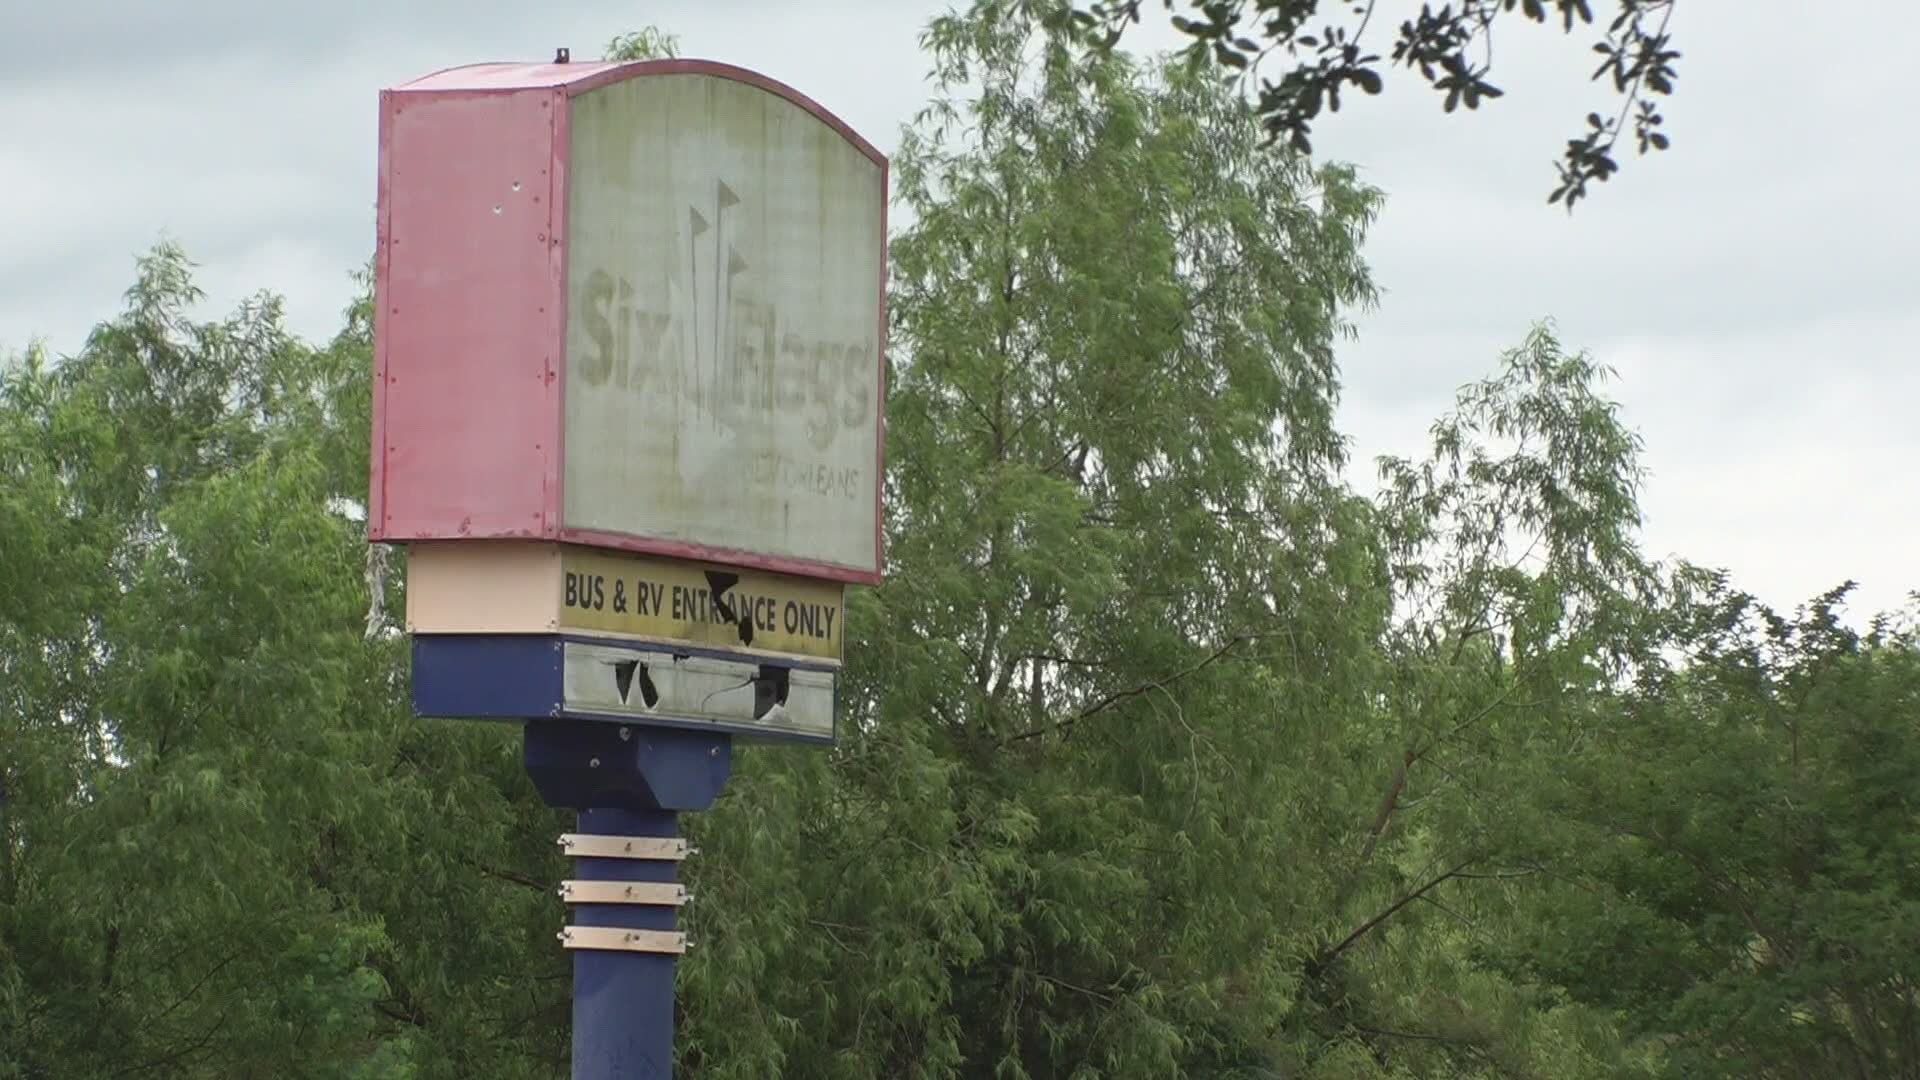 Two developers will compete for the next month for the right to redevelop the former Six Flags amusement park in New Orleans.